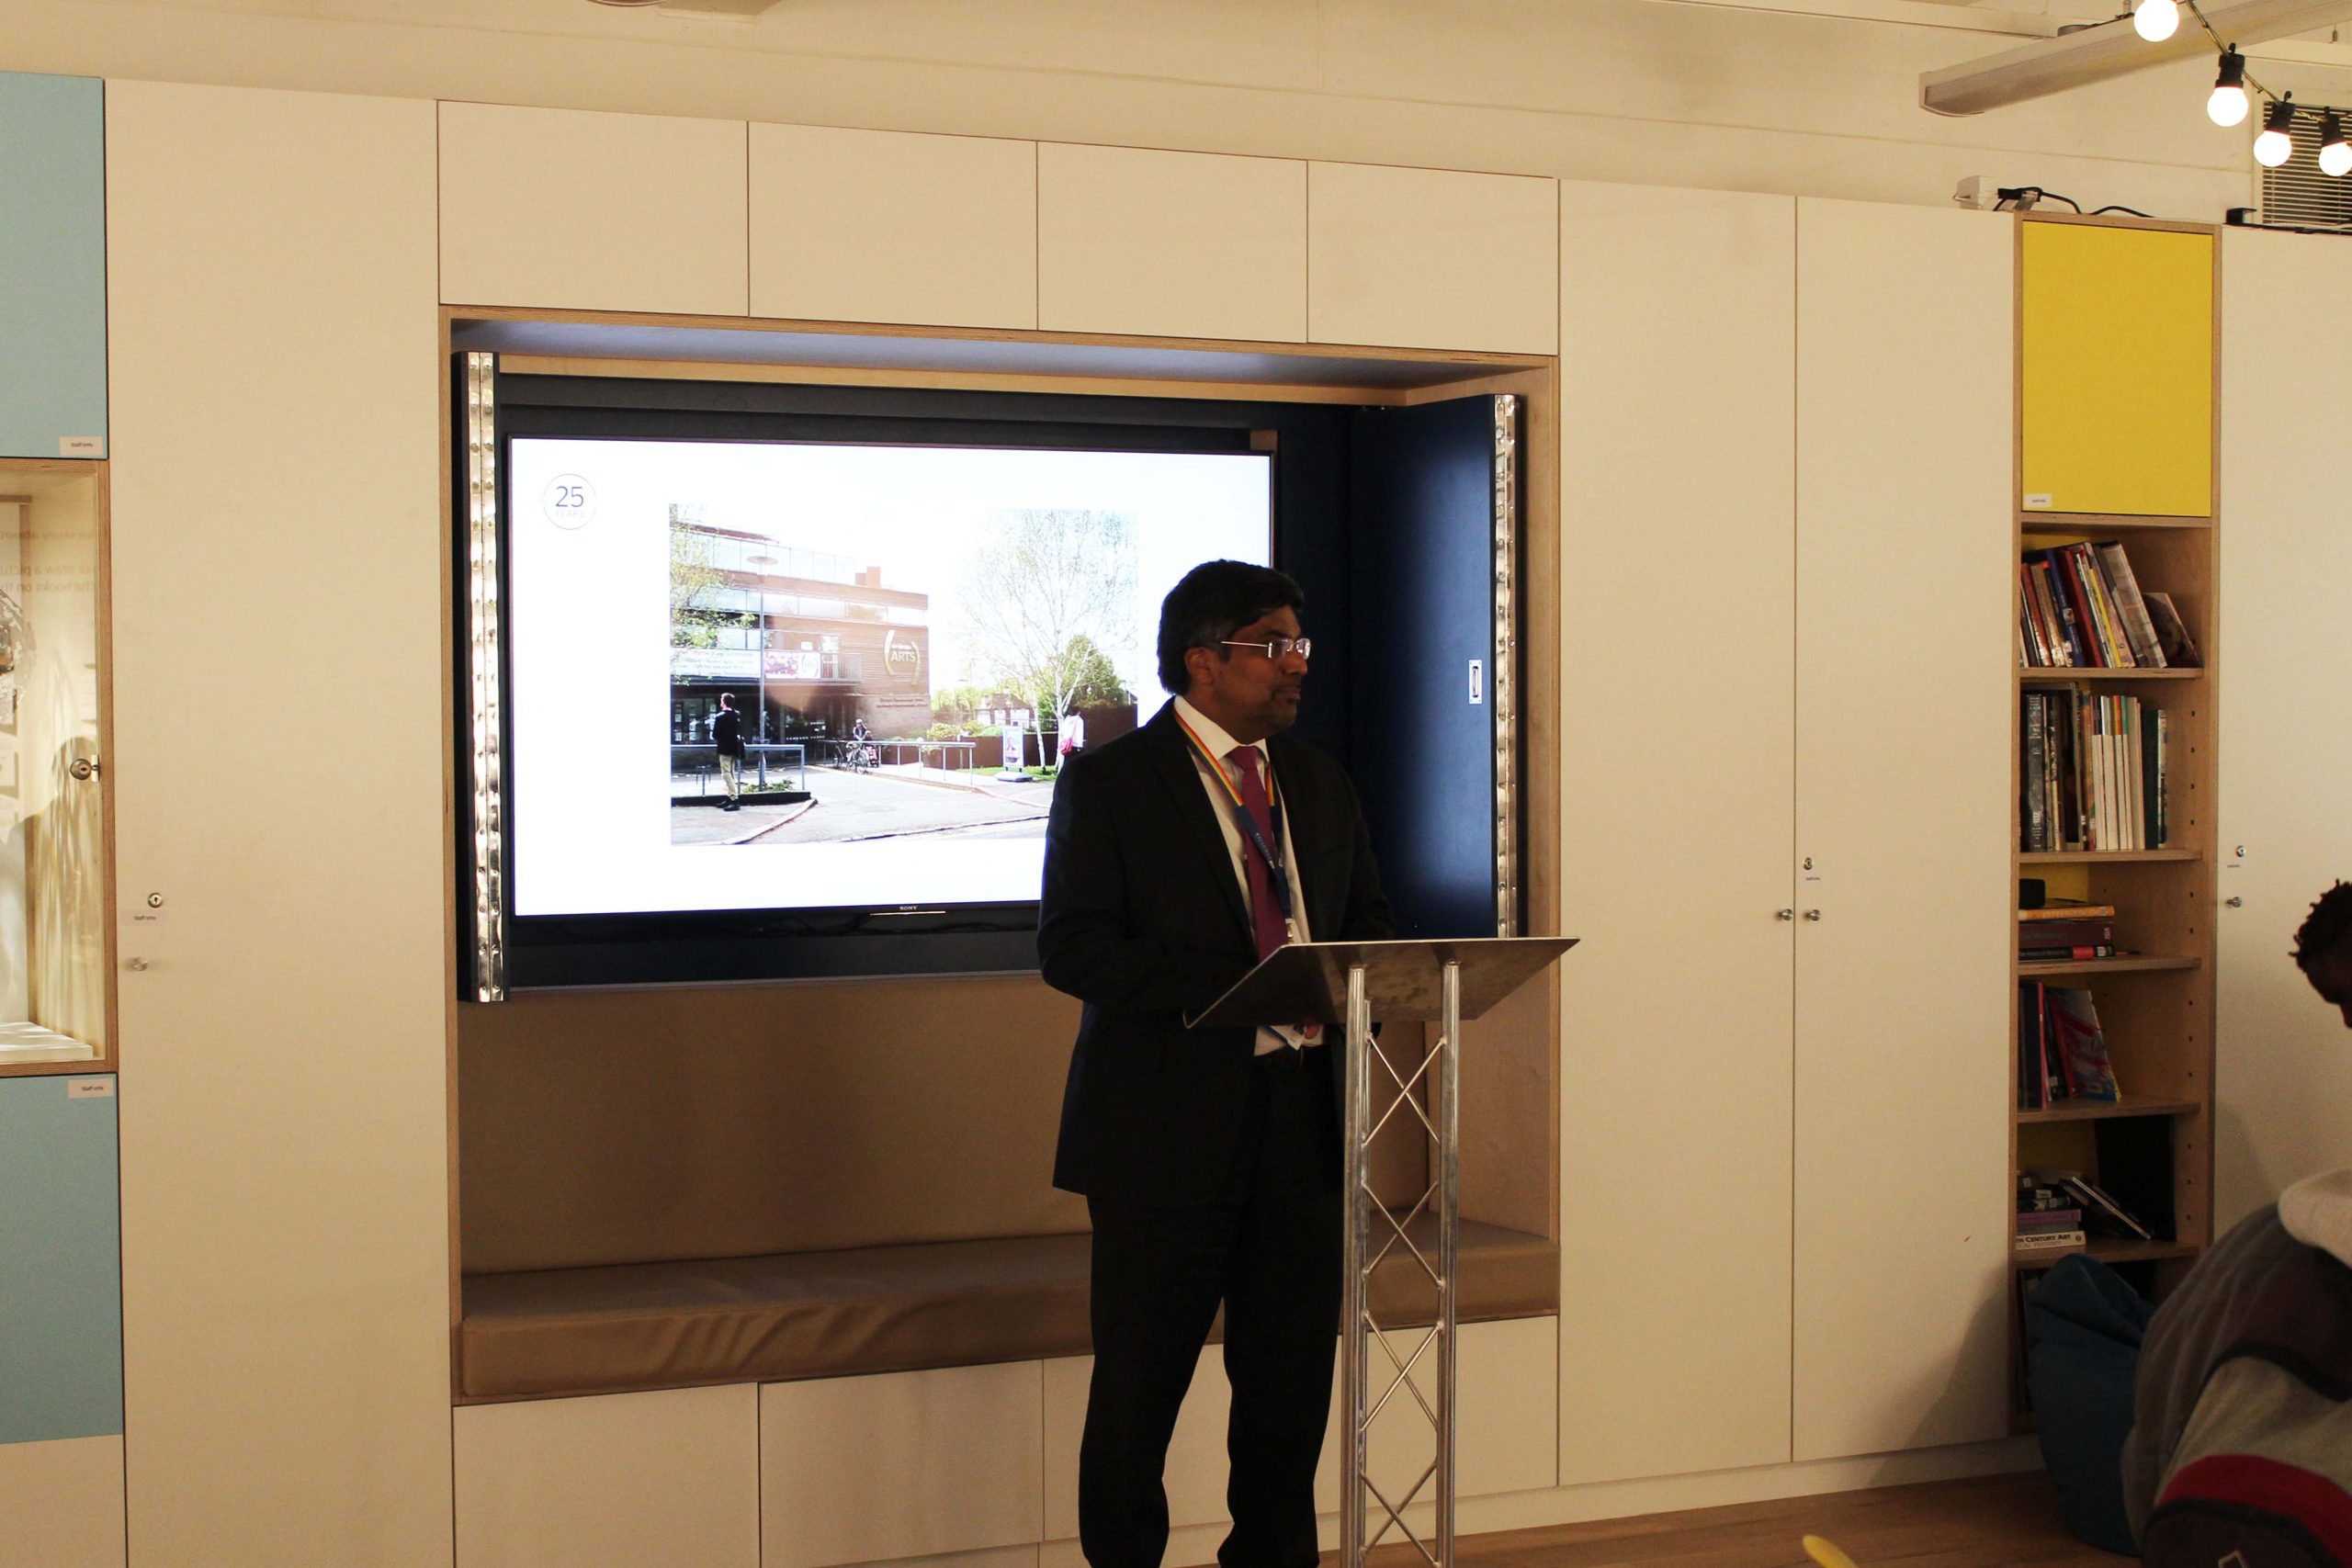 University of Leicester President and Vice-Chancellor Nishan Canagarajah giving a speech in the Salmon Gallery.